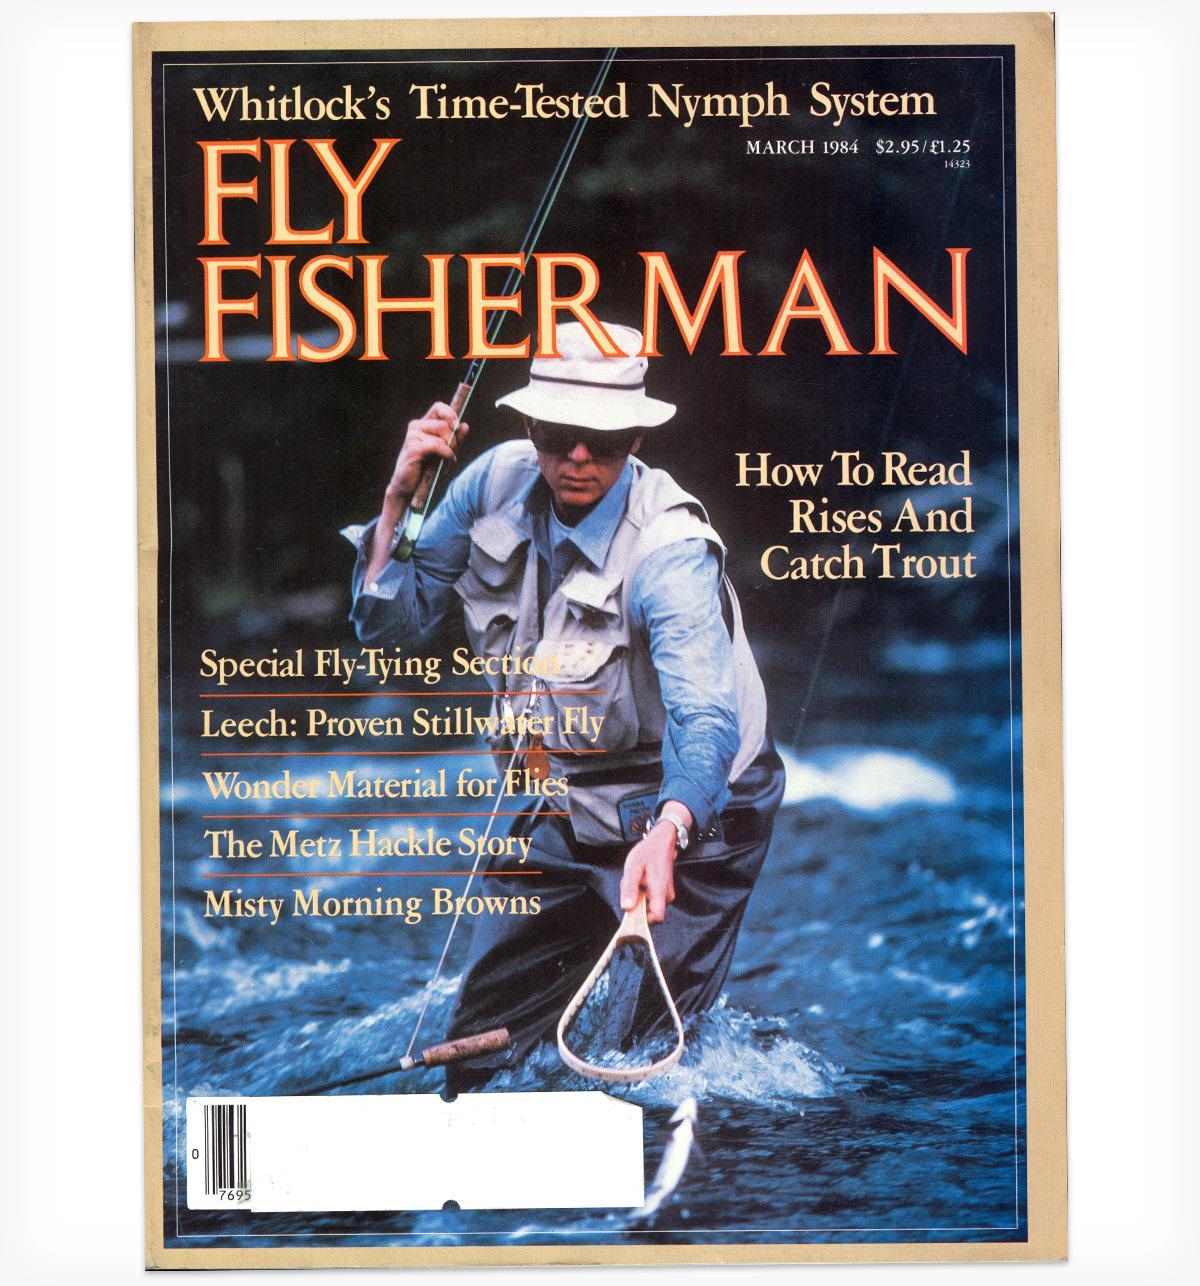 Fly Fisherman Throwback: The Whitlock Nymphing System-Part I - Fly Fisherman